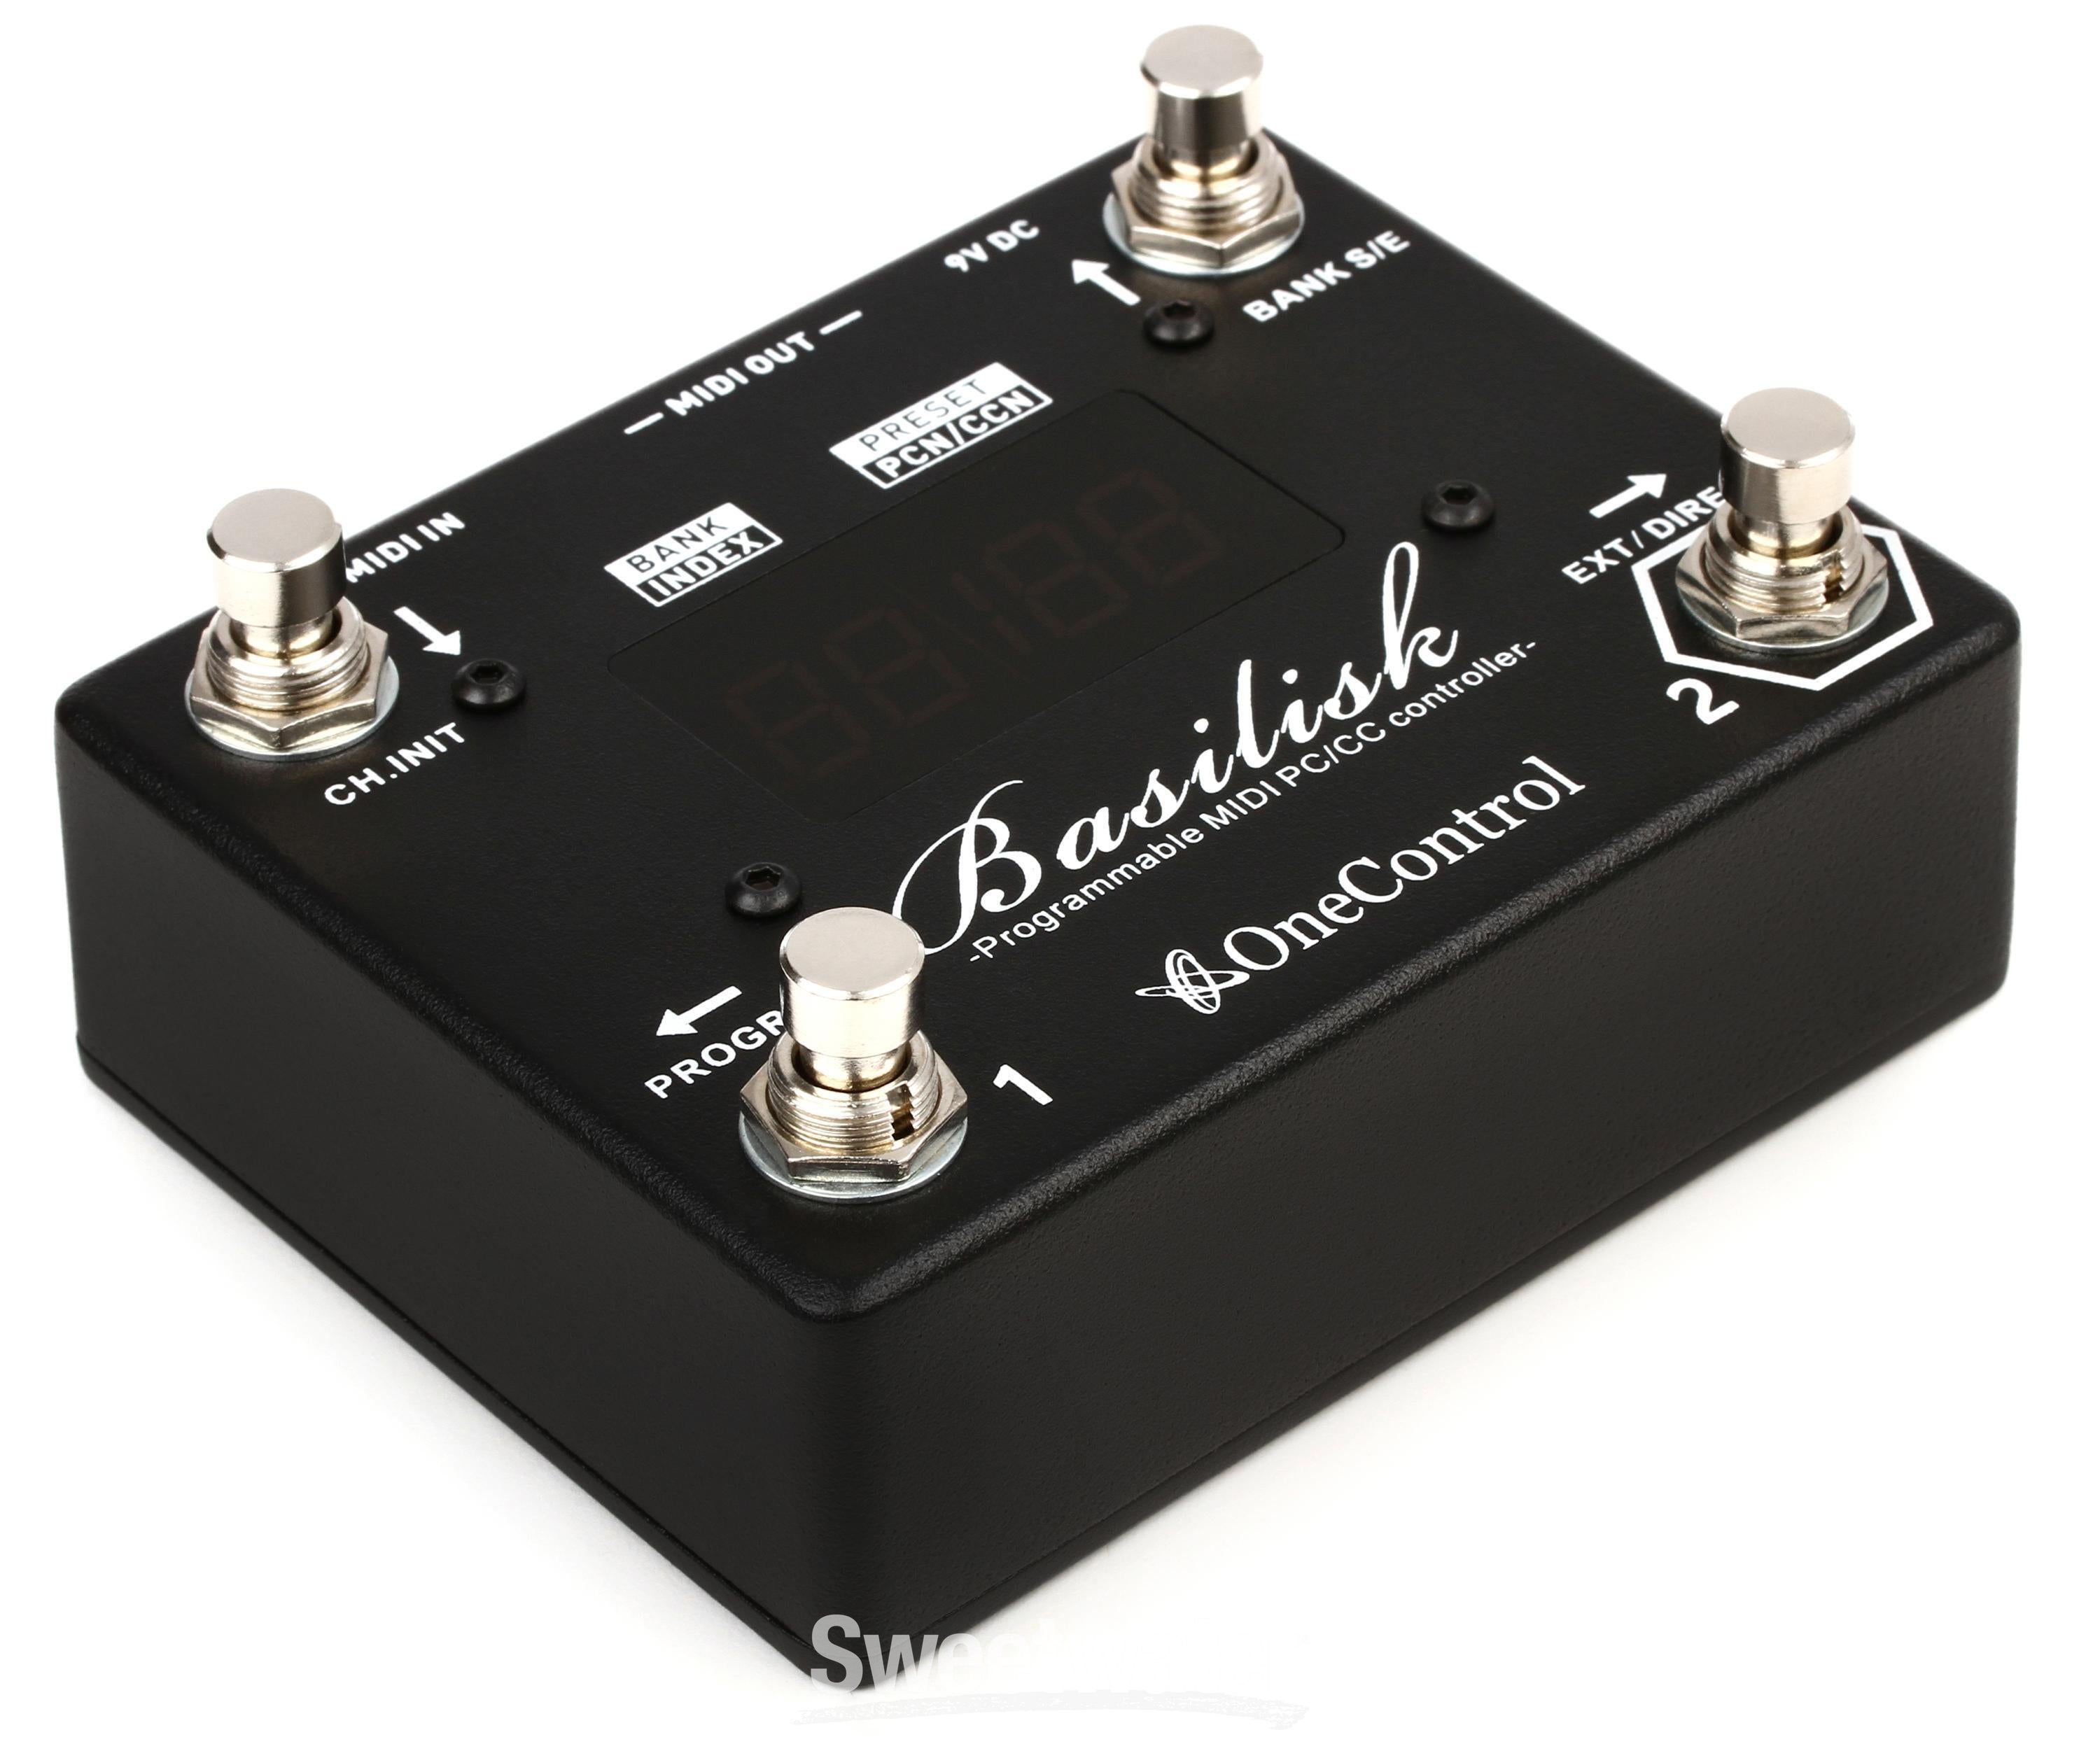 One Control Basilisk Programmable MIDI Switching Pedal | Sweetwater